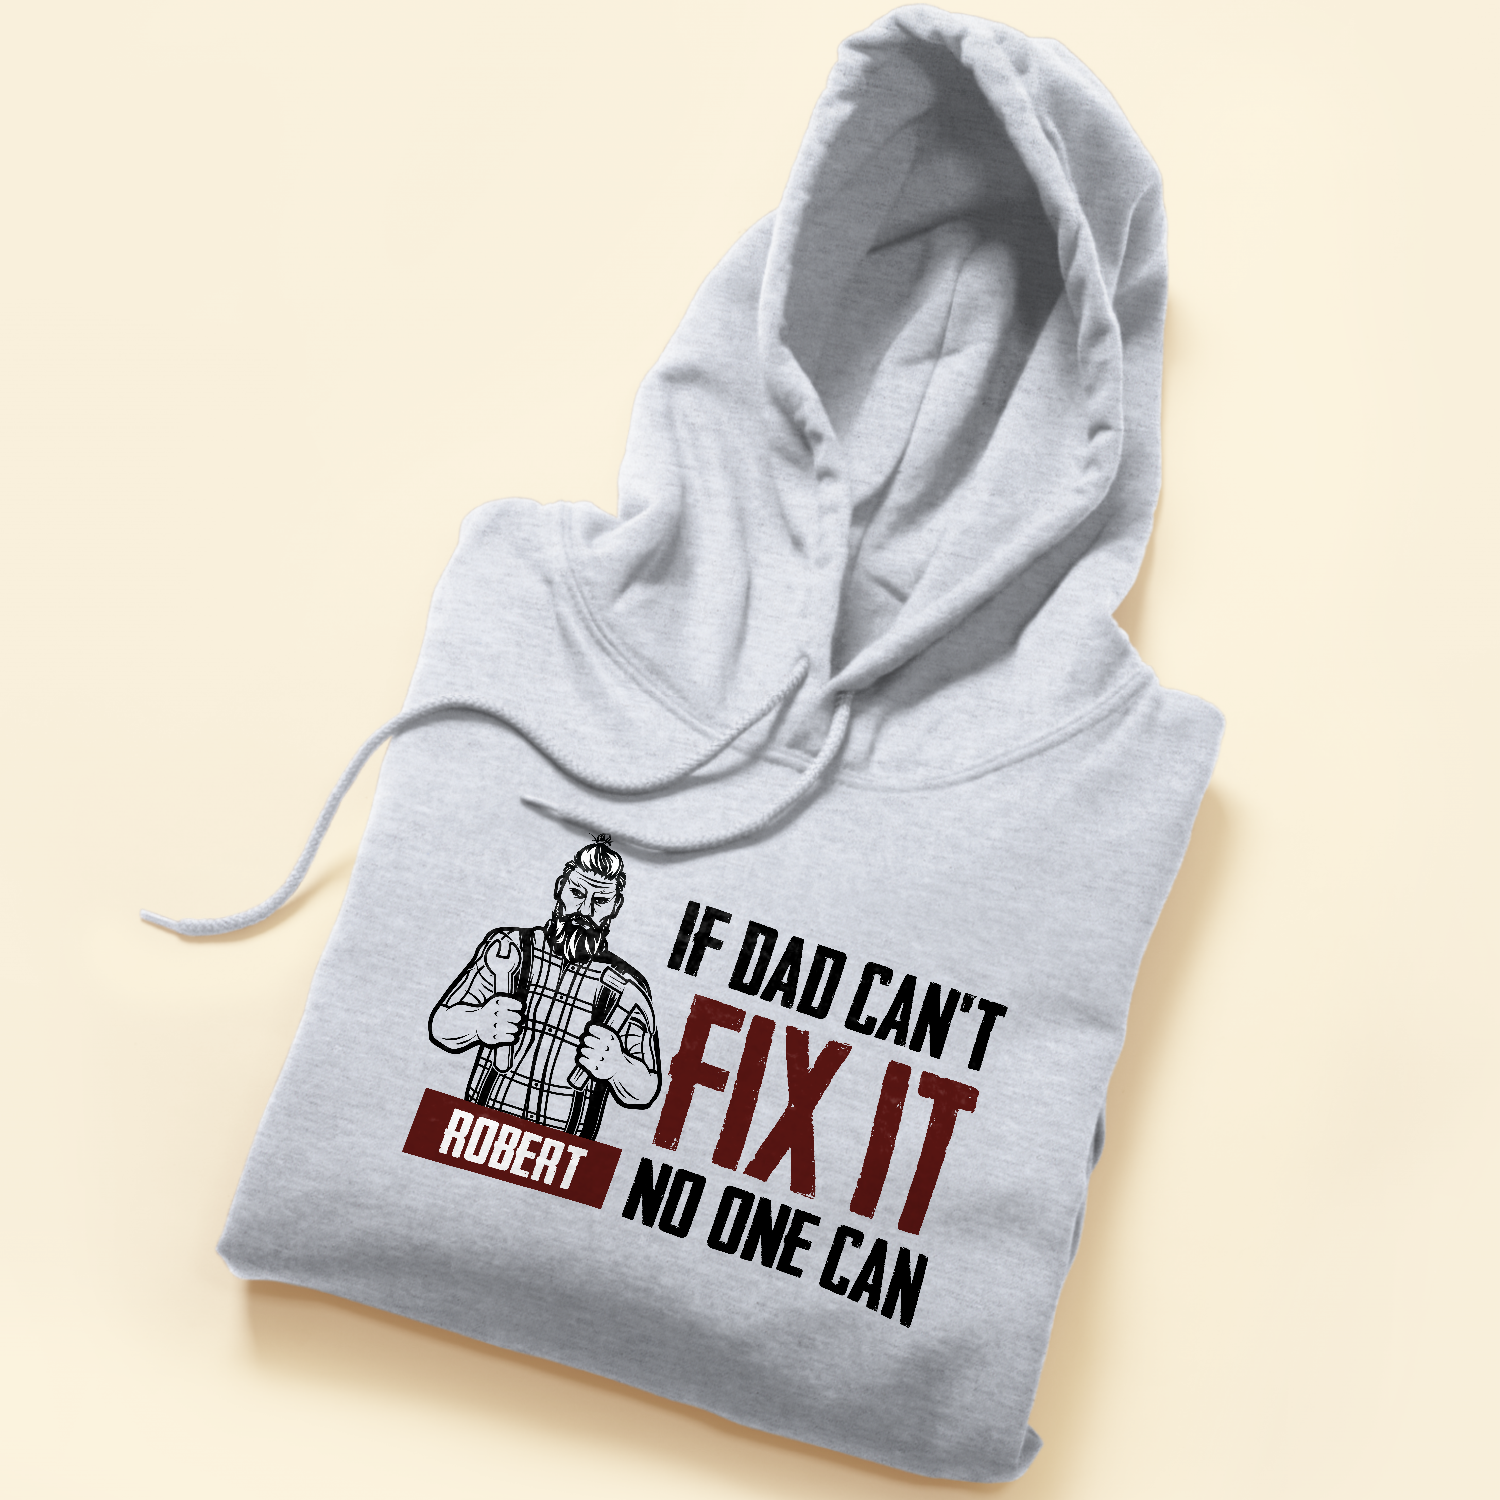 If Dad Can't Fix It No One Can - Personalized Shirt - Father's Day